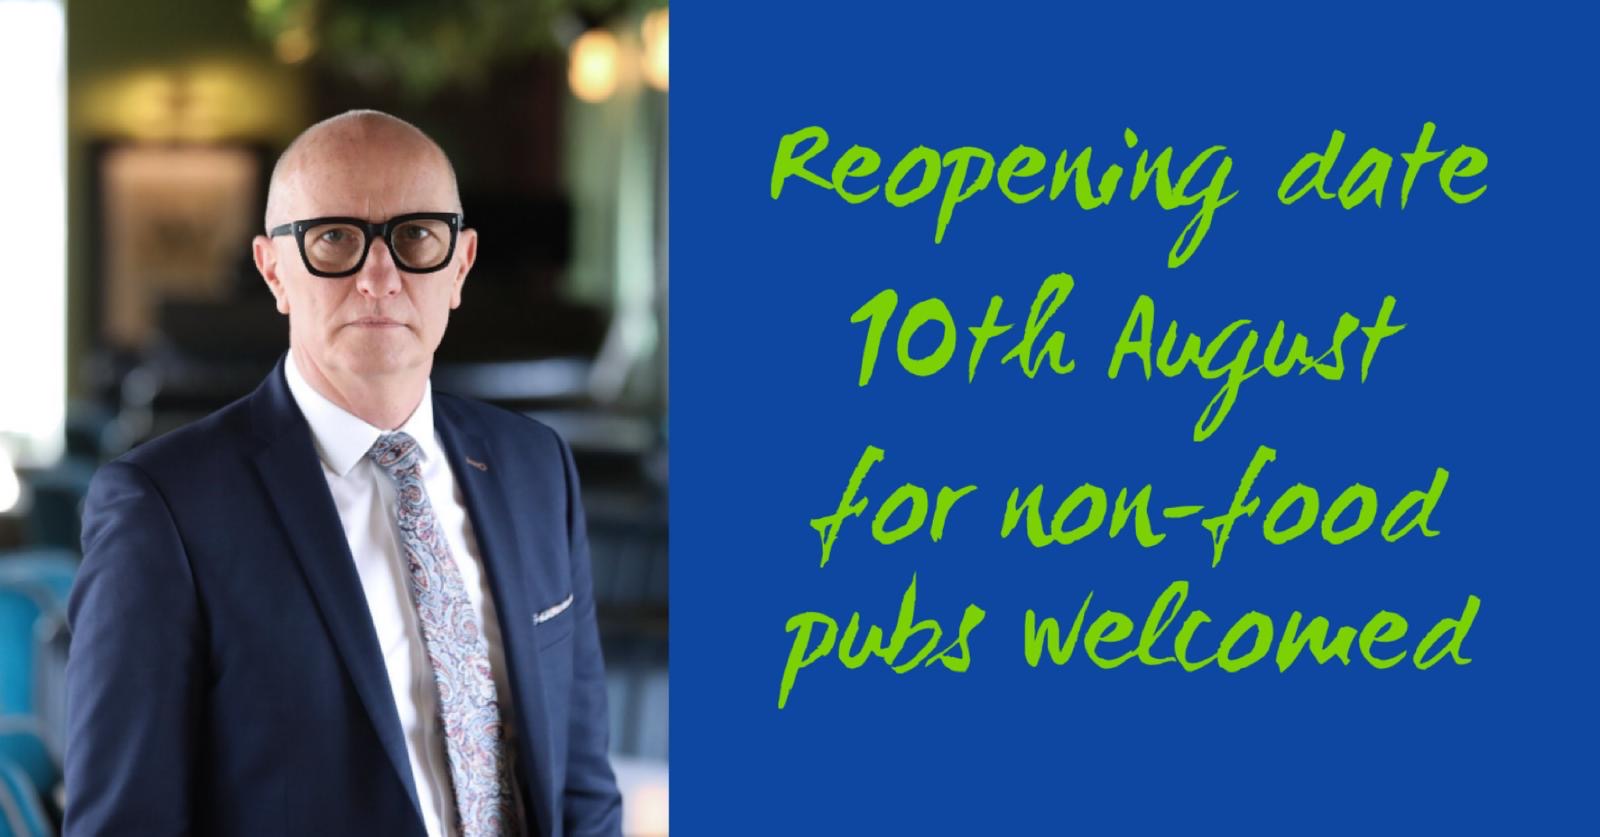 WET LED NON FOOD PUBS SECURE OPENING DATE - HU WELCOMES DATE FOR REOPENING OF ALL PUBS